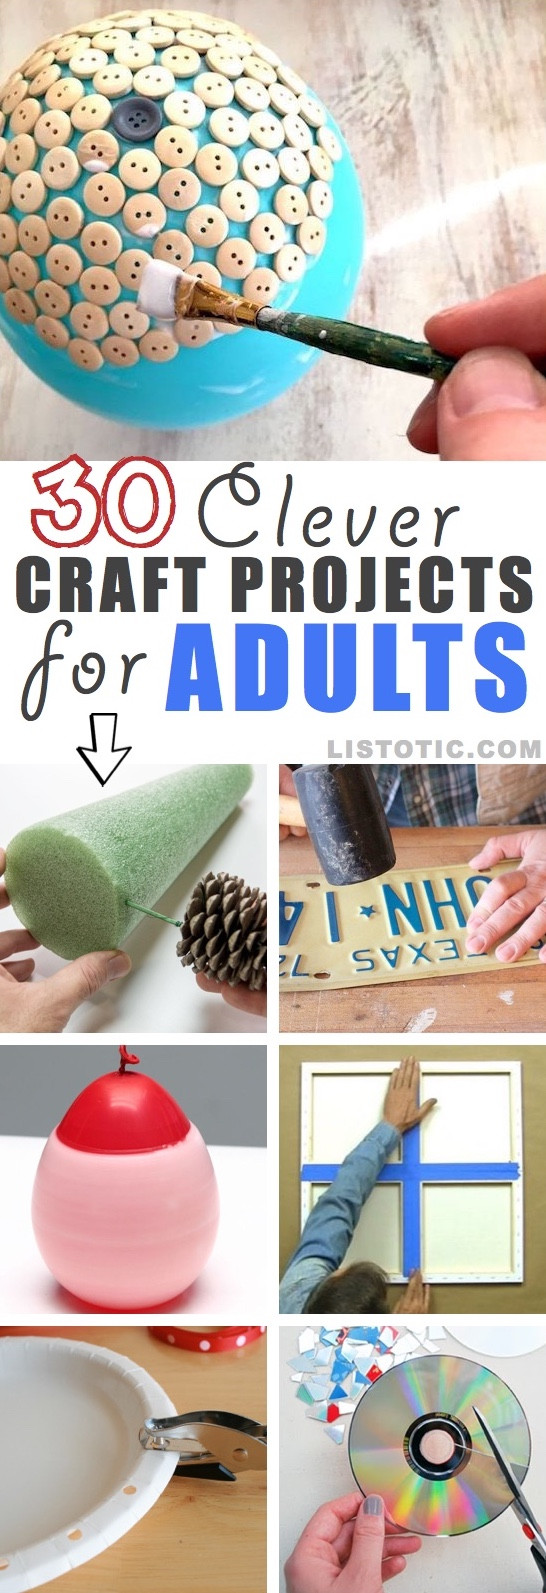 Craft Ideas For Adults To Make And Sell
 Easy DIY Craft Ideas That Will Spark Your Creativity for